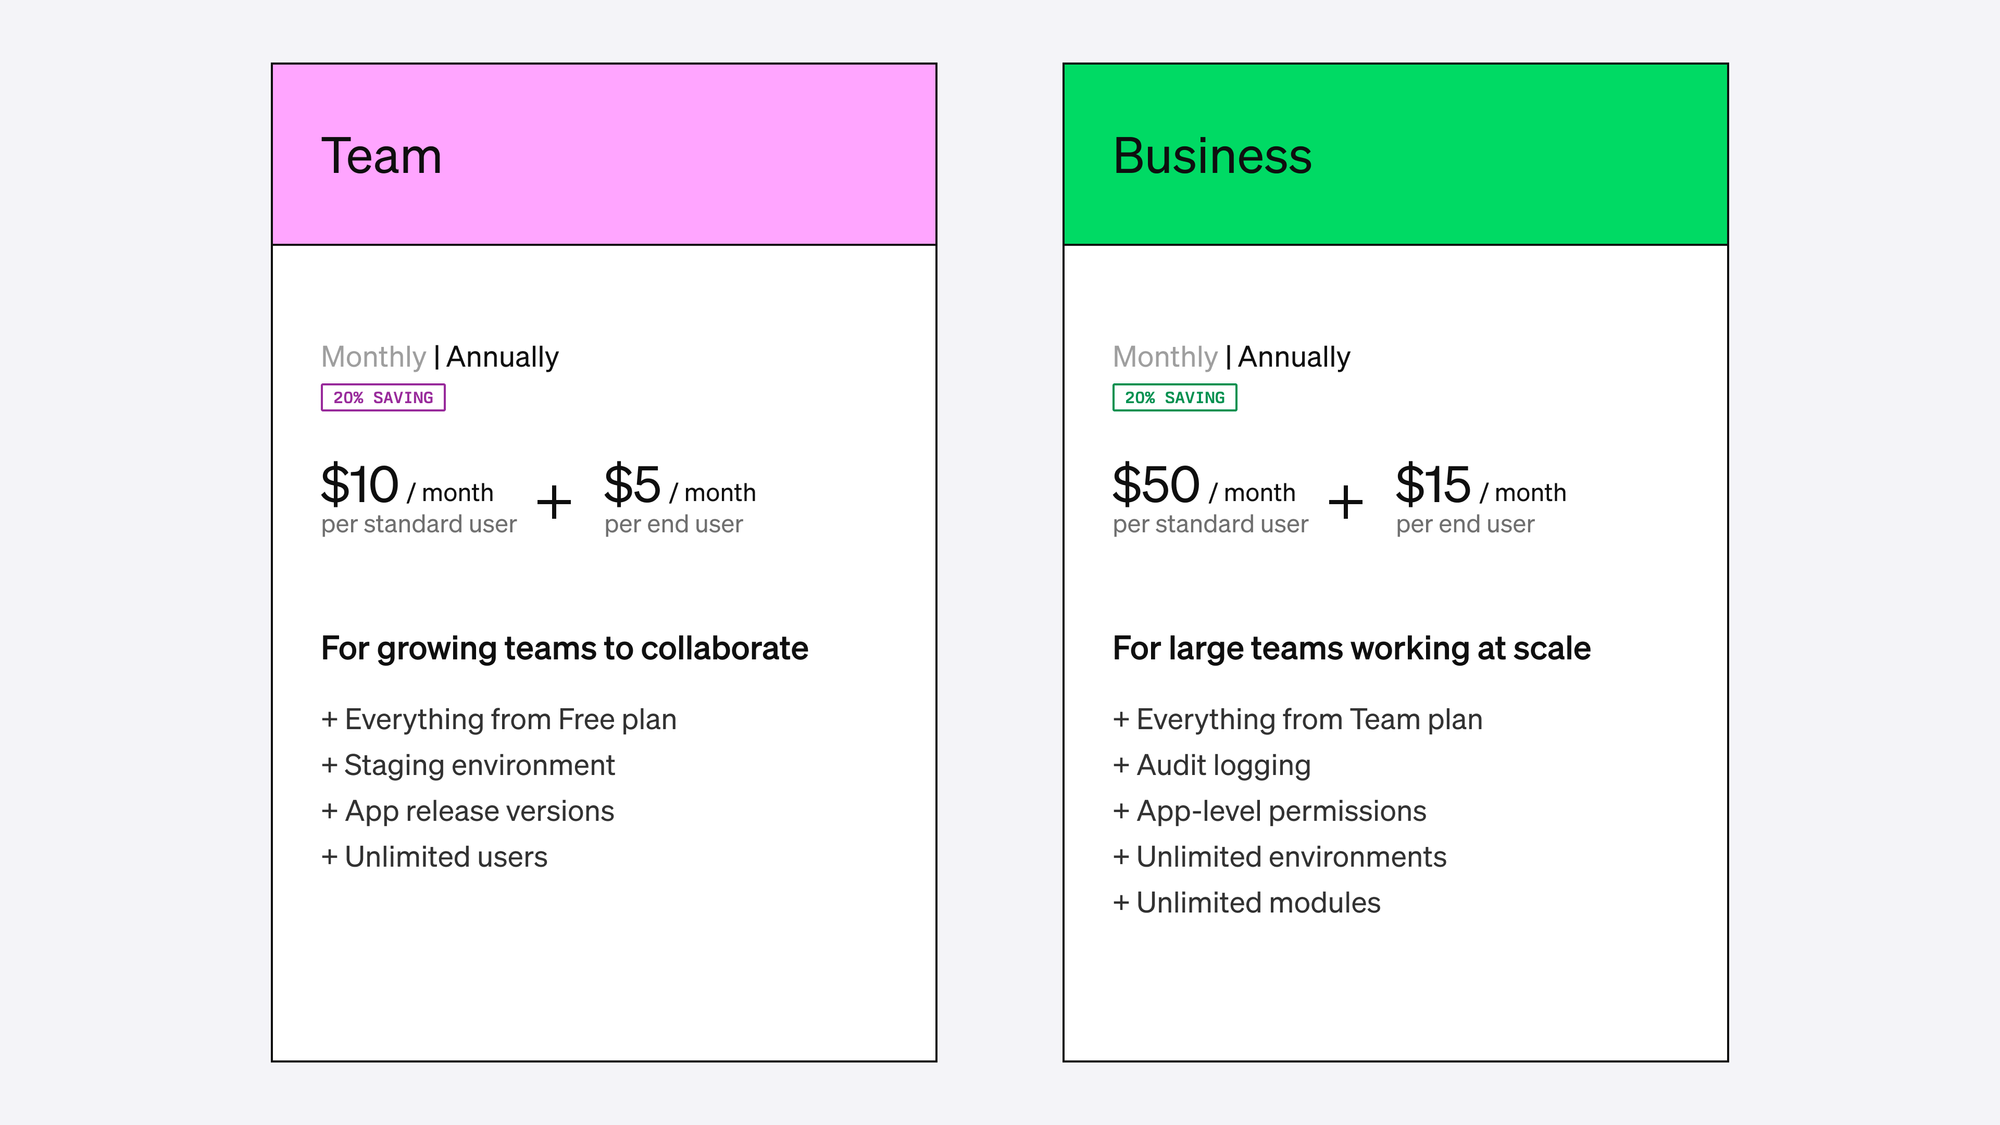 Two cards highlighting Retool's new pricing for Team and Business plans. The Team card lists $10/month per standard user and $5/month per end user with an annual commitment. The Team plan is for growing teams to collaborate and includes everything from Free plan, Staging environment, App release versions, and unlimited users. The Business card highlights $50/month per standard user and $15 per month per end user with an annual commitment. The Business plan is for large teams working at scales and includes everything from the Team plan, Audit logging, app-level permissions, unlimited environments, and unlimited modules.  